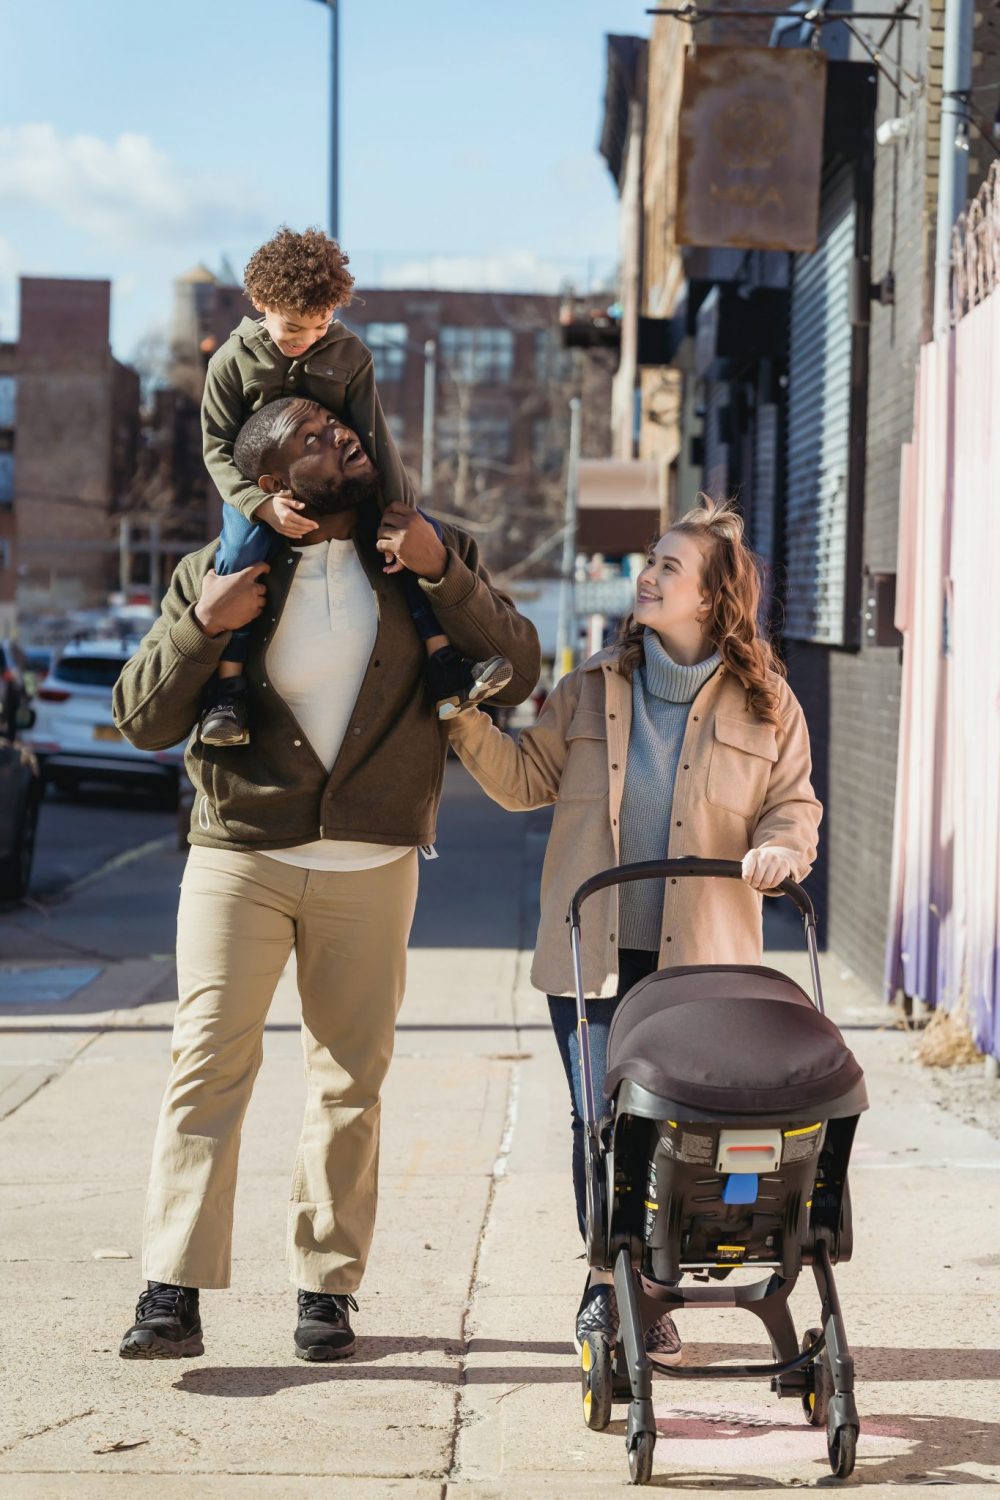 family taking a walk with baby and the stroller through a city street